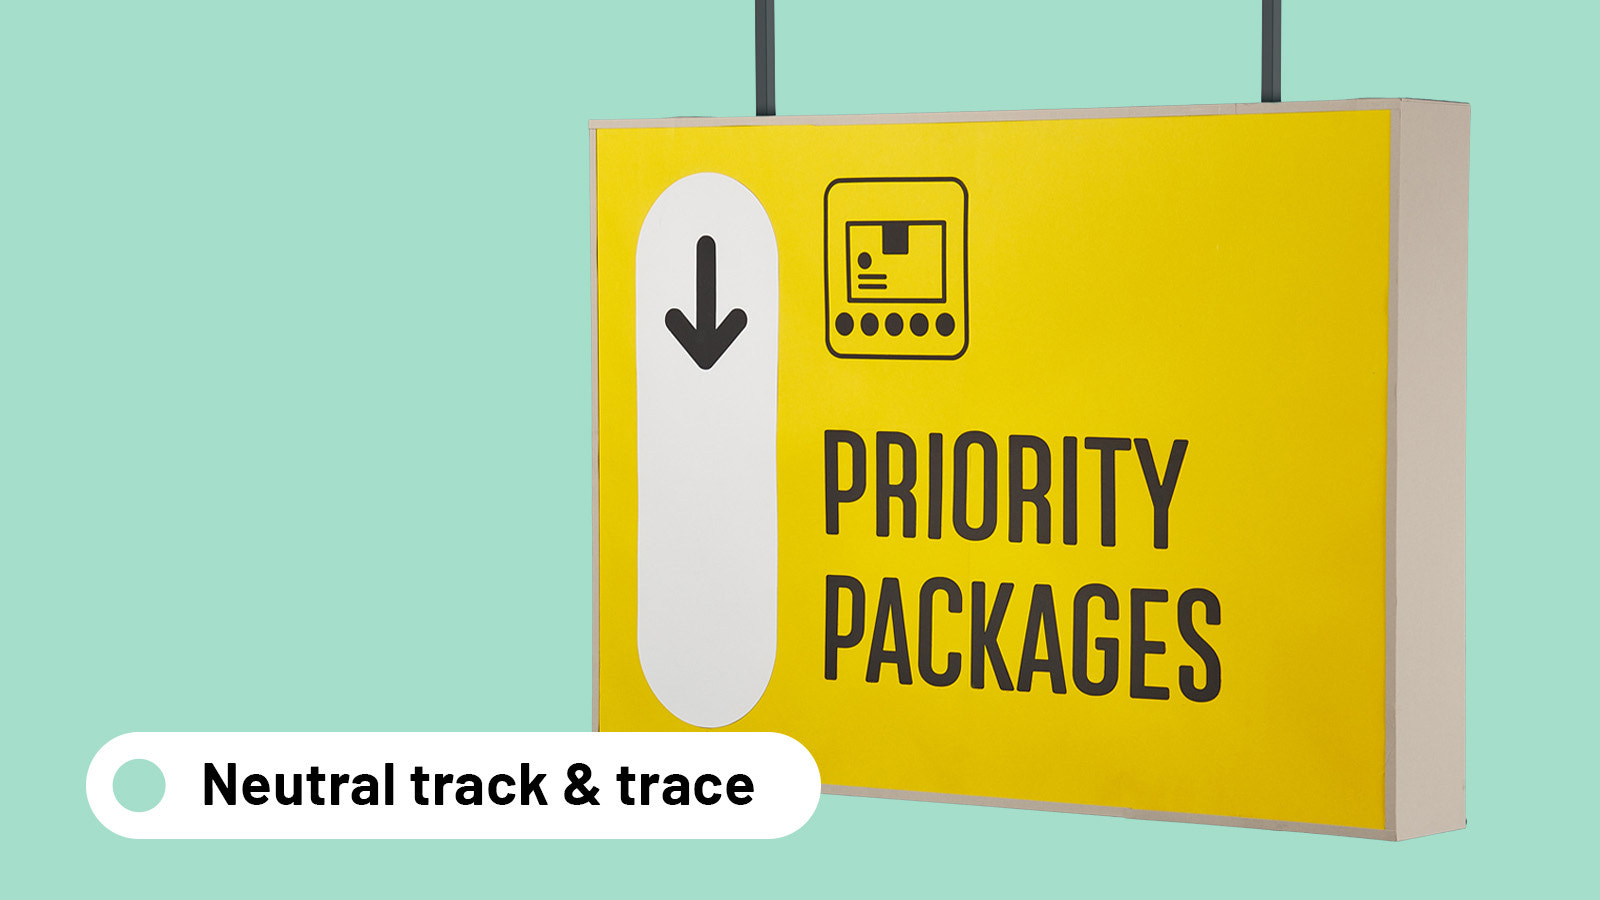 Customers receive a neutral track & trace page for updates